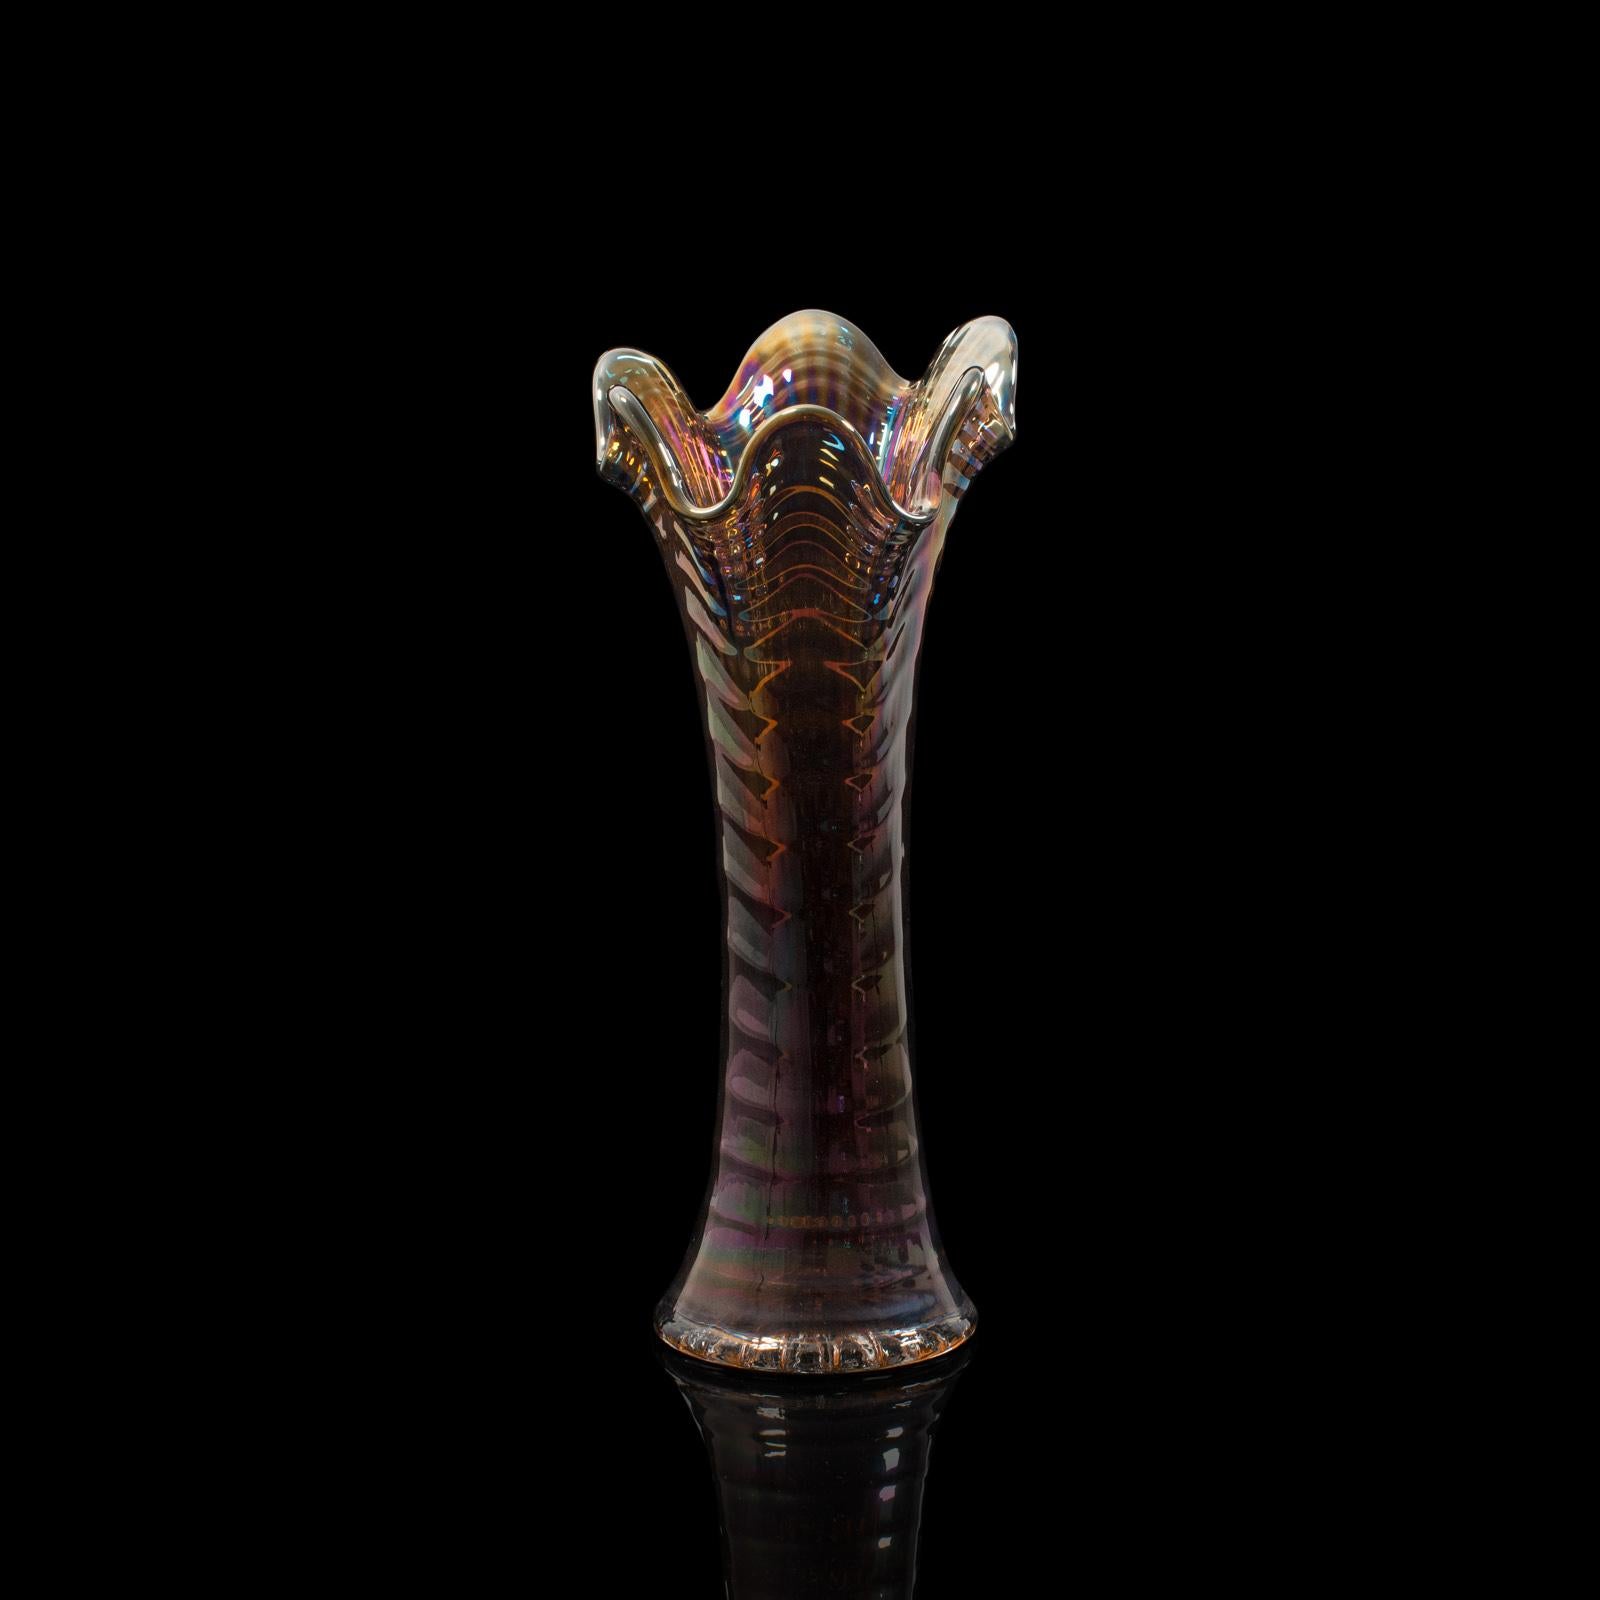 This is a vintage decorative vase. An English, carnival glass ornament with fine lustre, dating to the mid-20th century, circa 1940.

Highly appealing and expressive finish
Displaying a desirable aged patina - free of marks
Carnival glass with